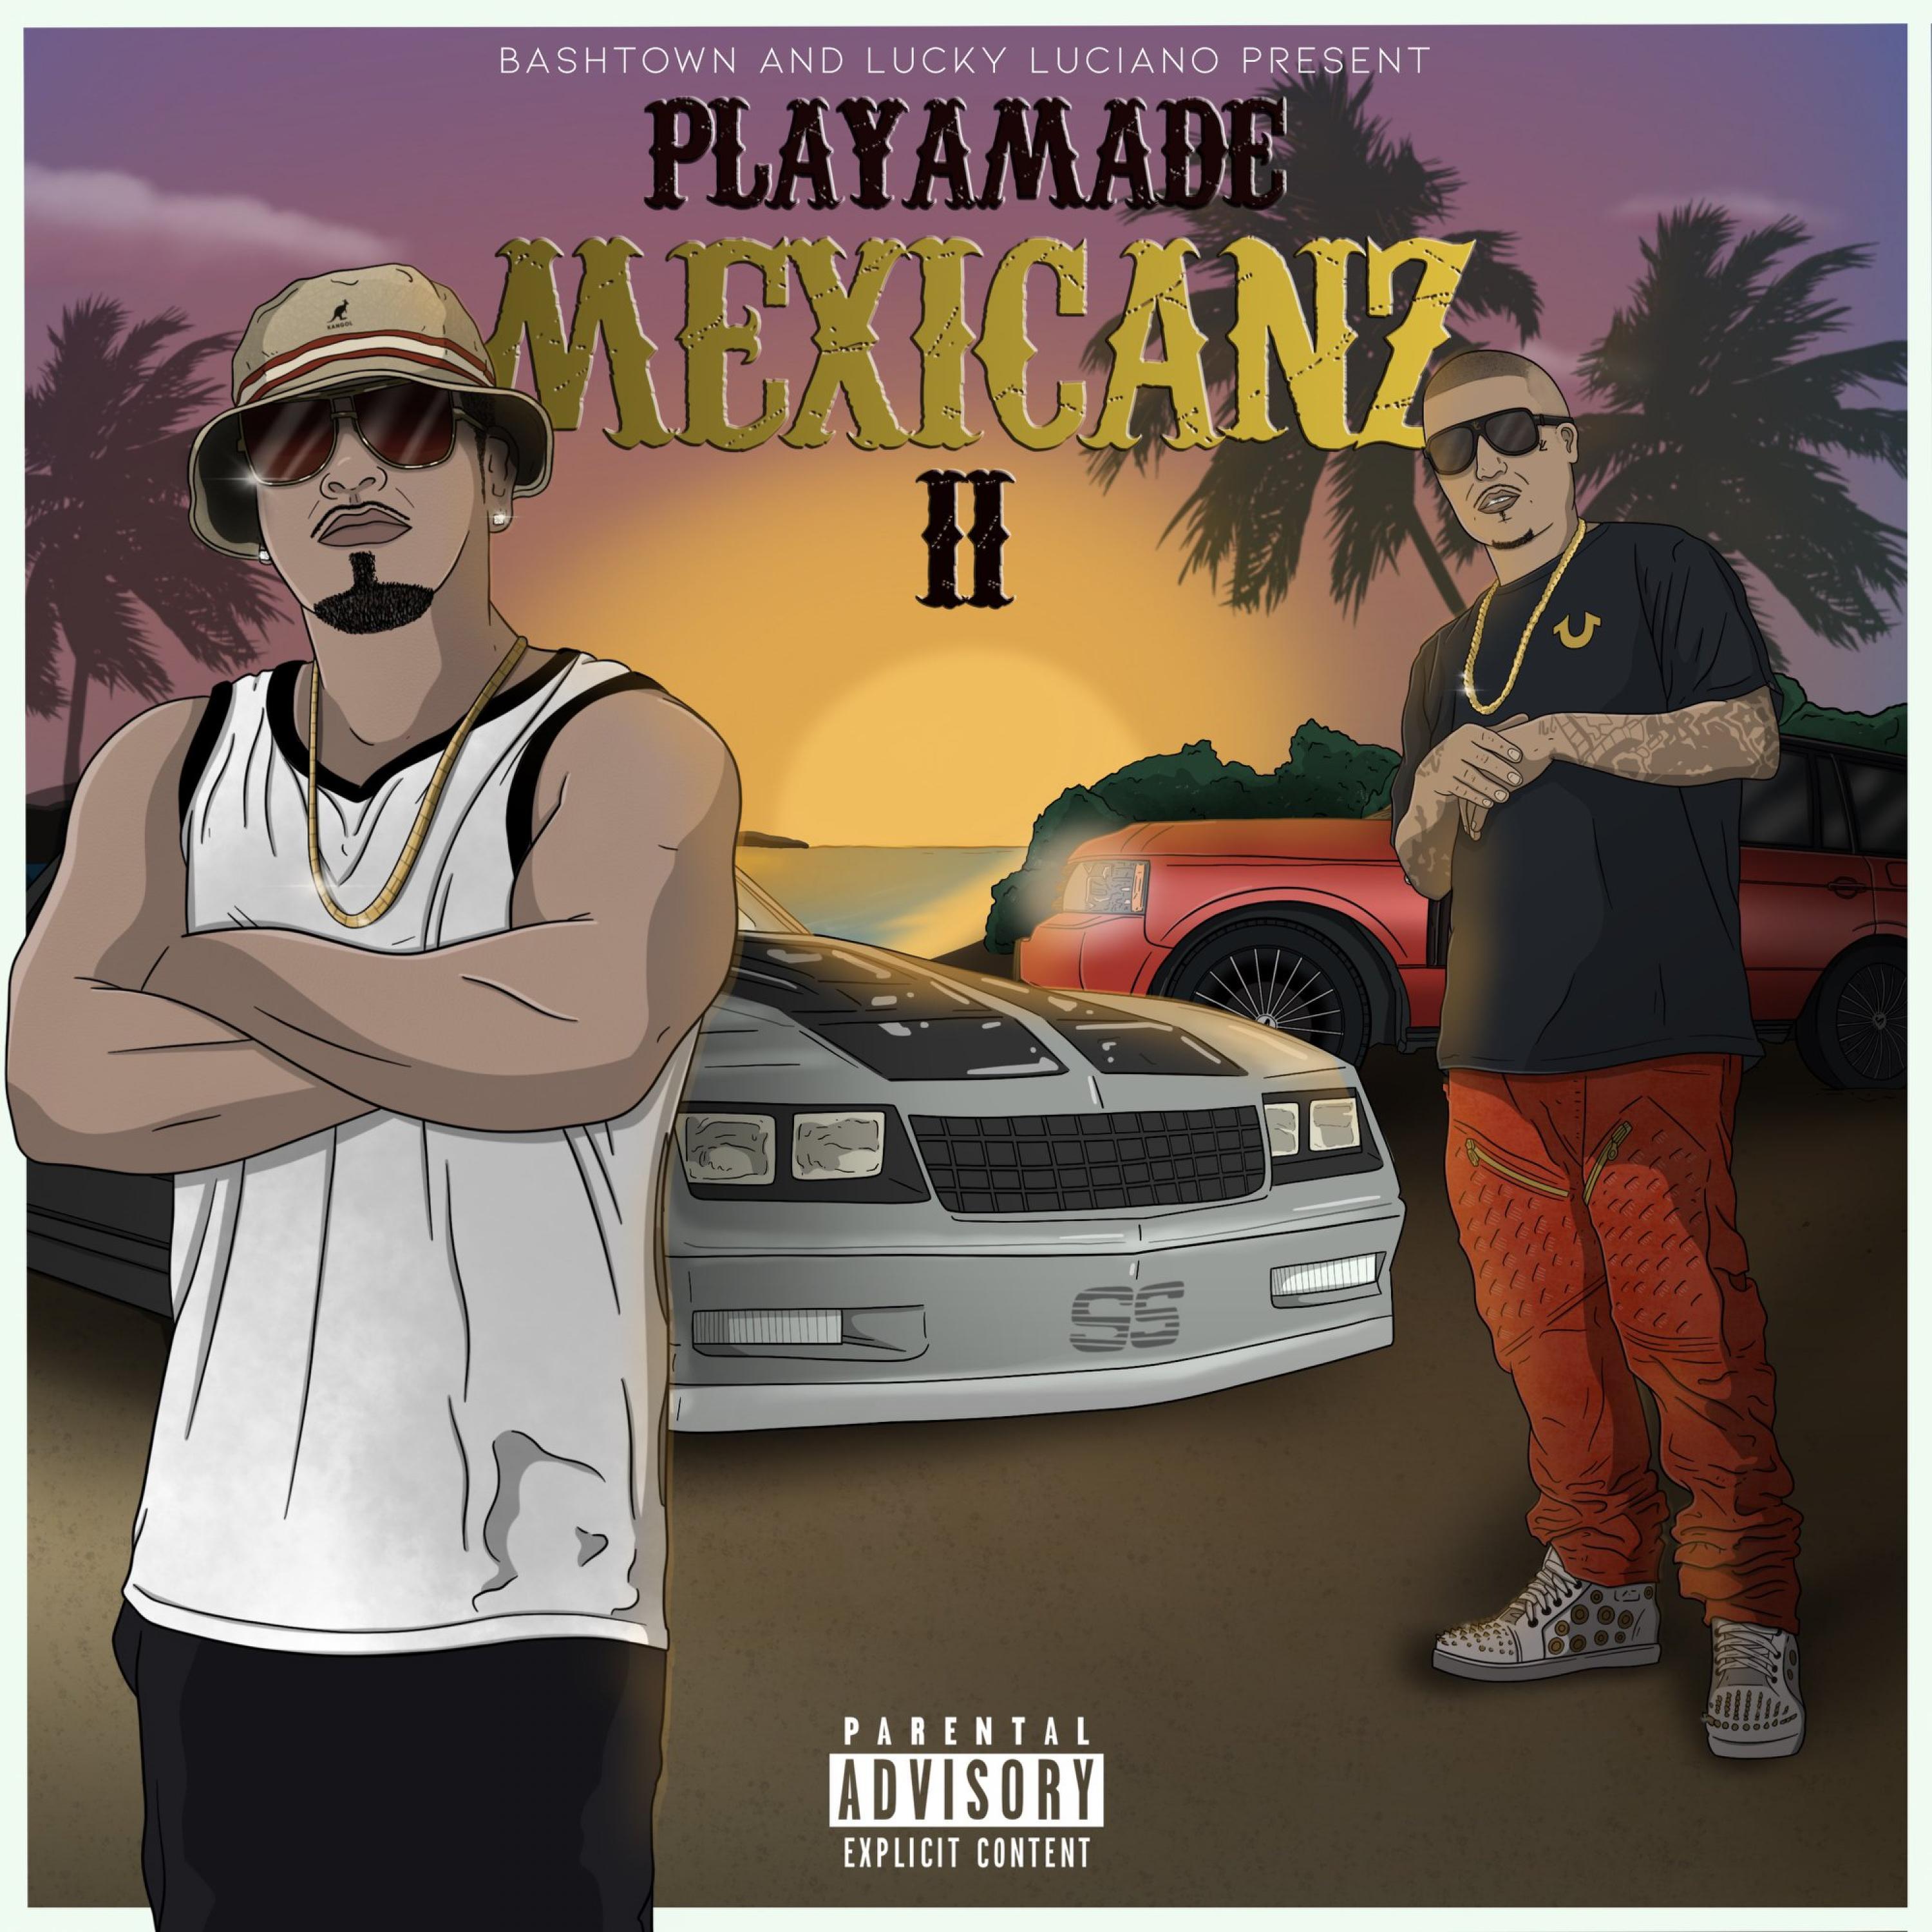 Playamade Mexican